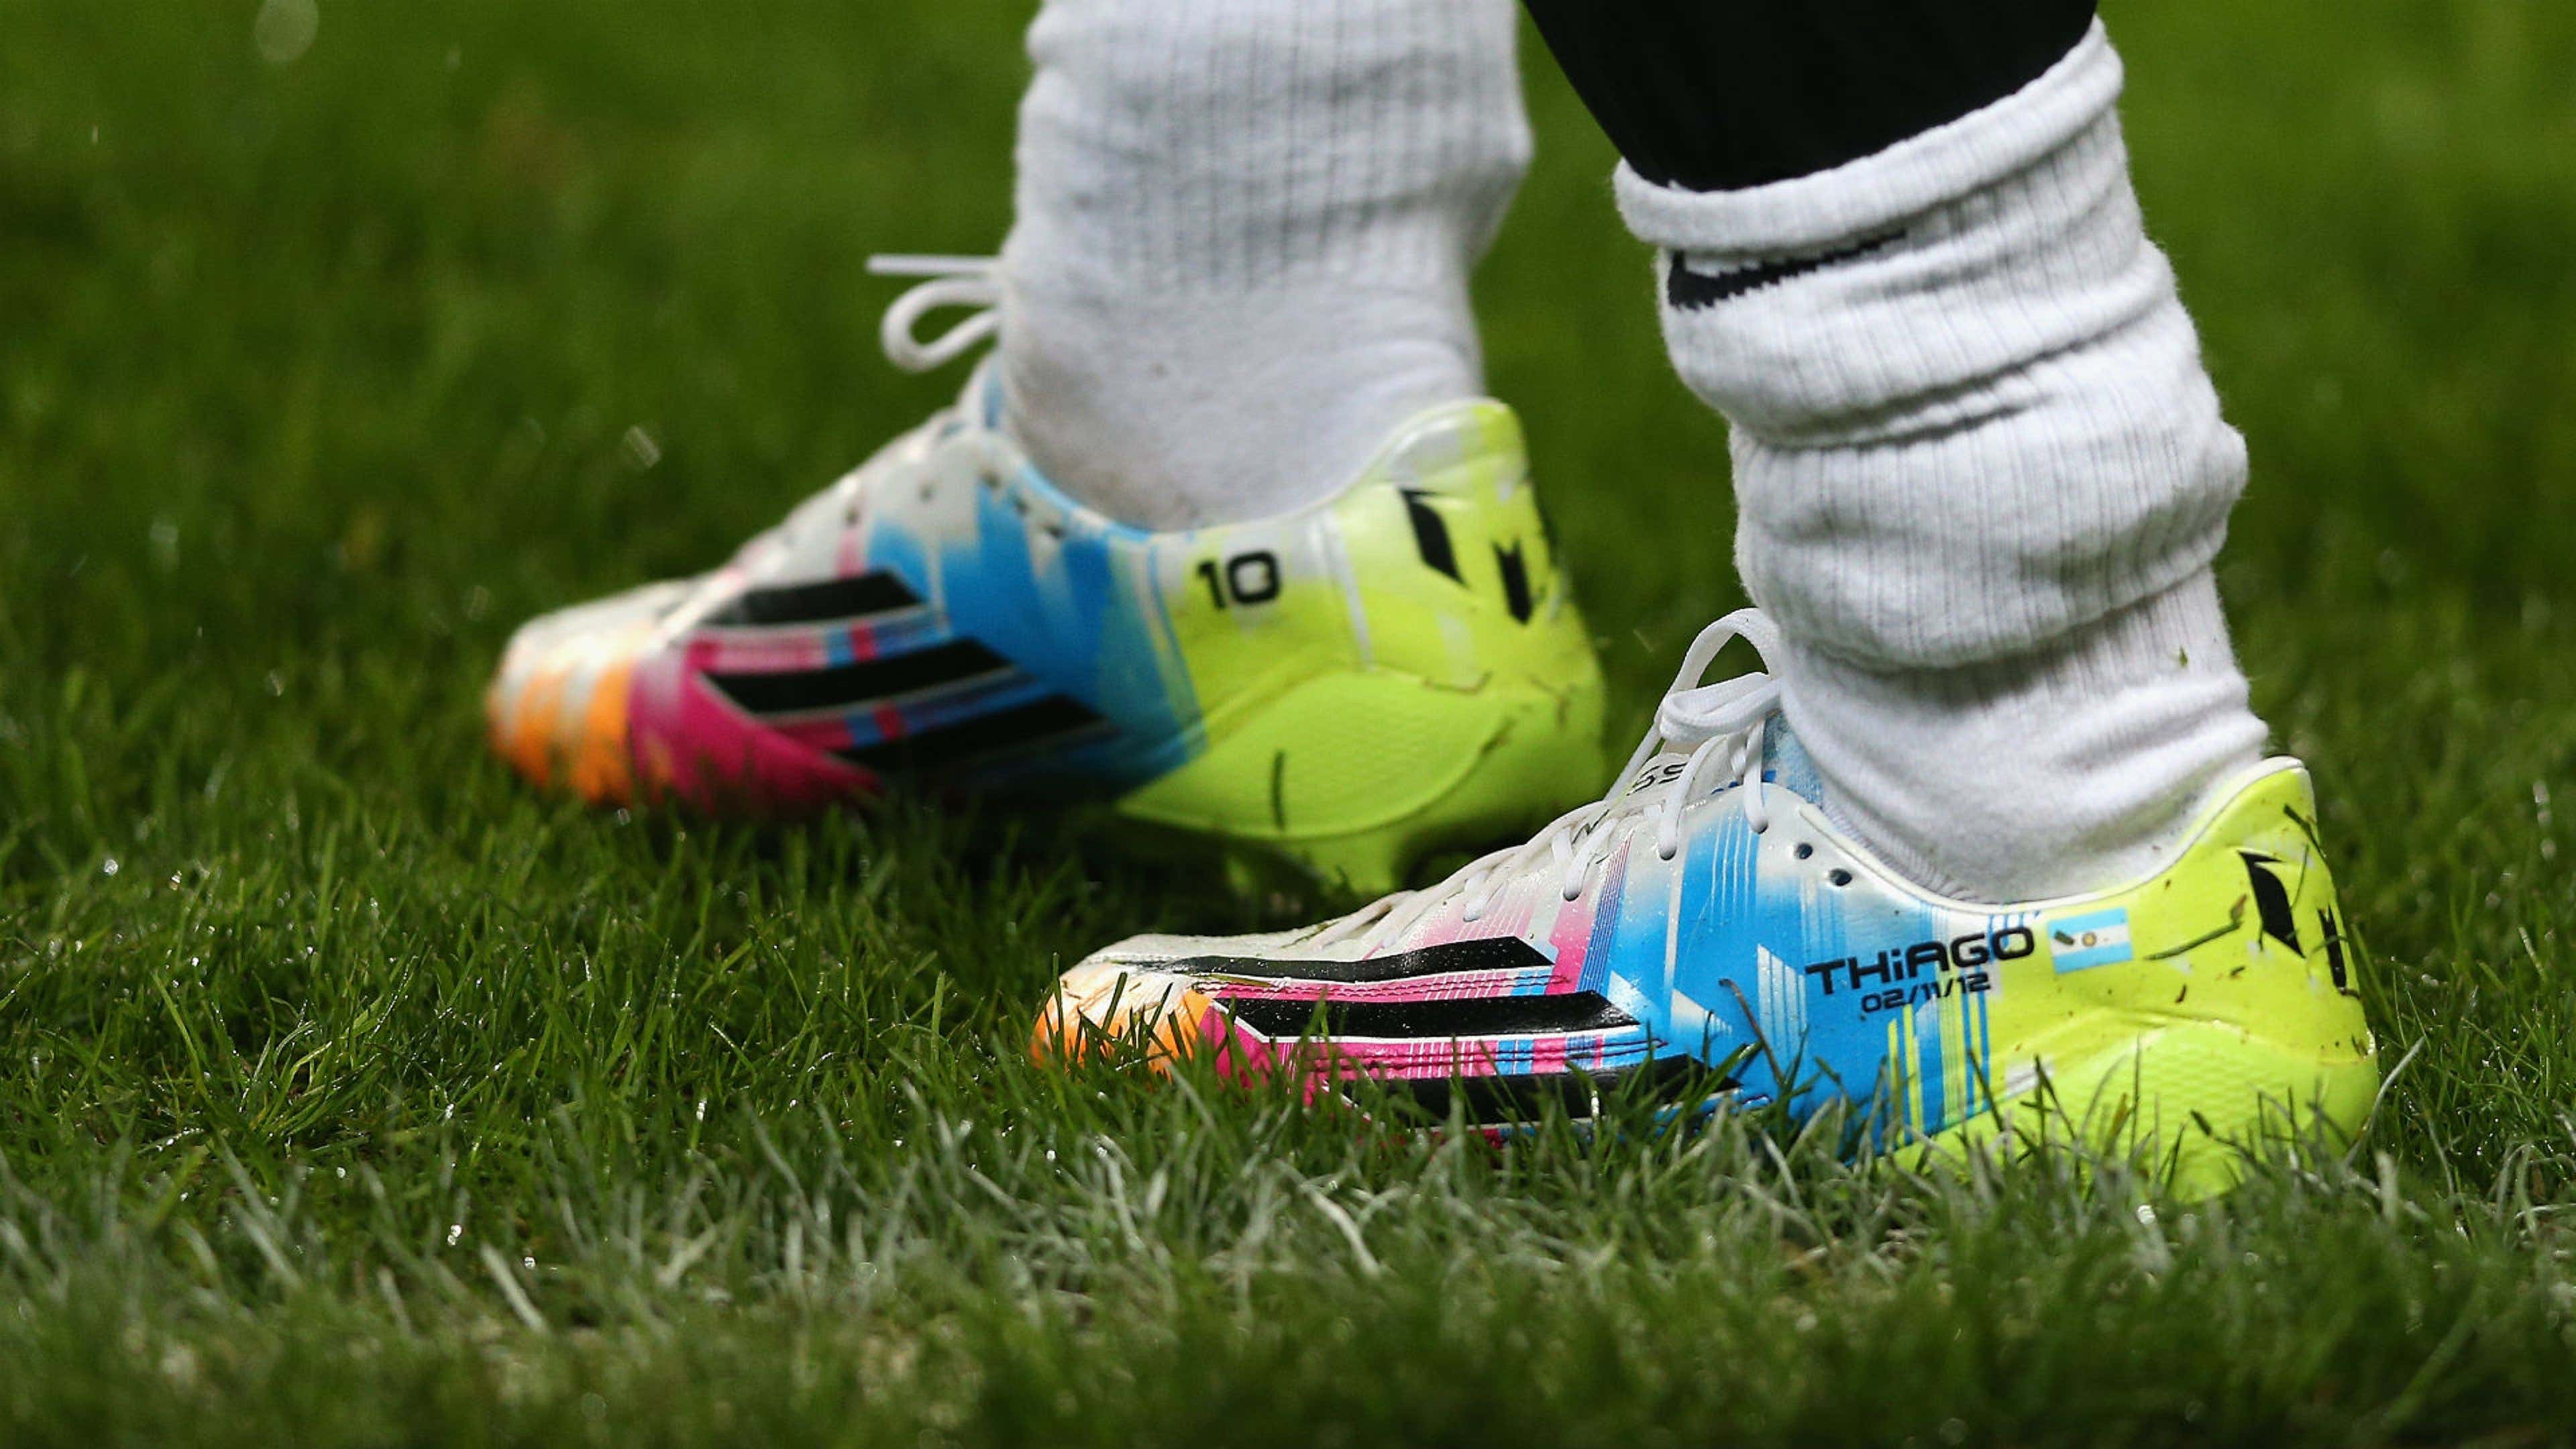 Lionel Messi's boots - a history of Barcelona & star's best footwear | US